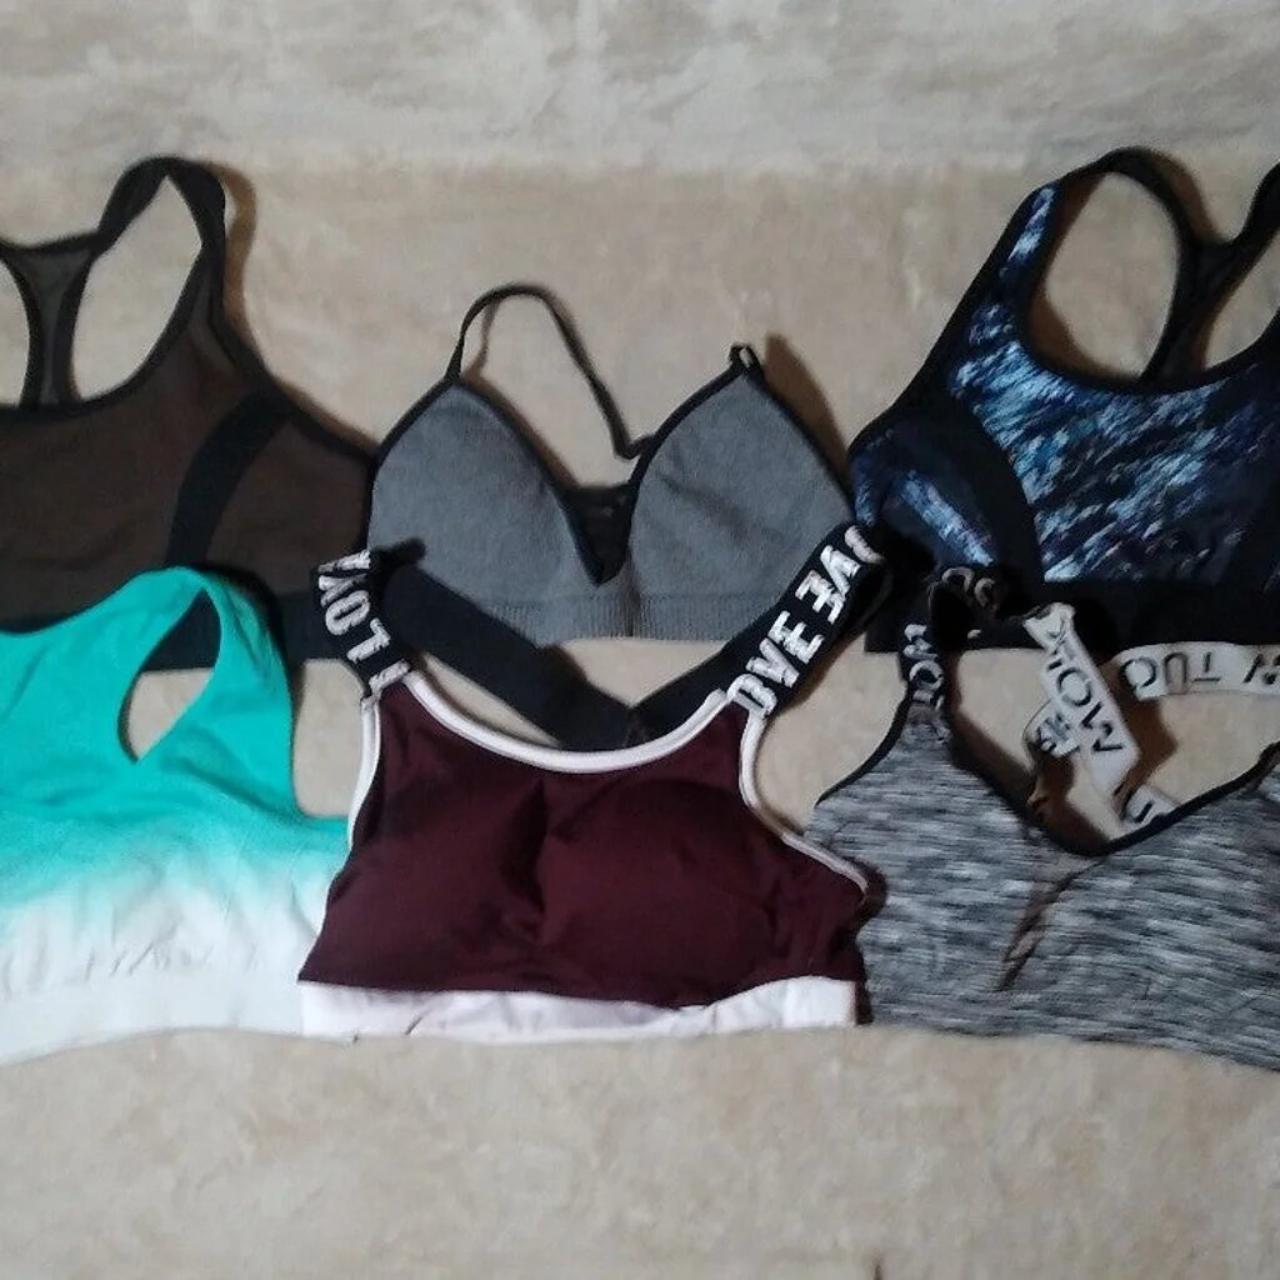 Womens Sports Bra's Lot of 6 - Good Condition Size - Depop